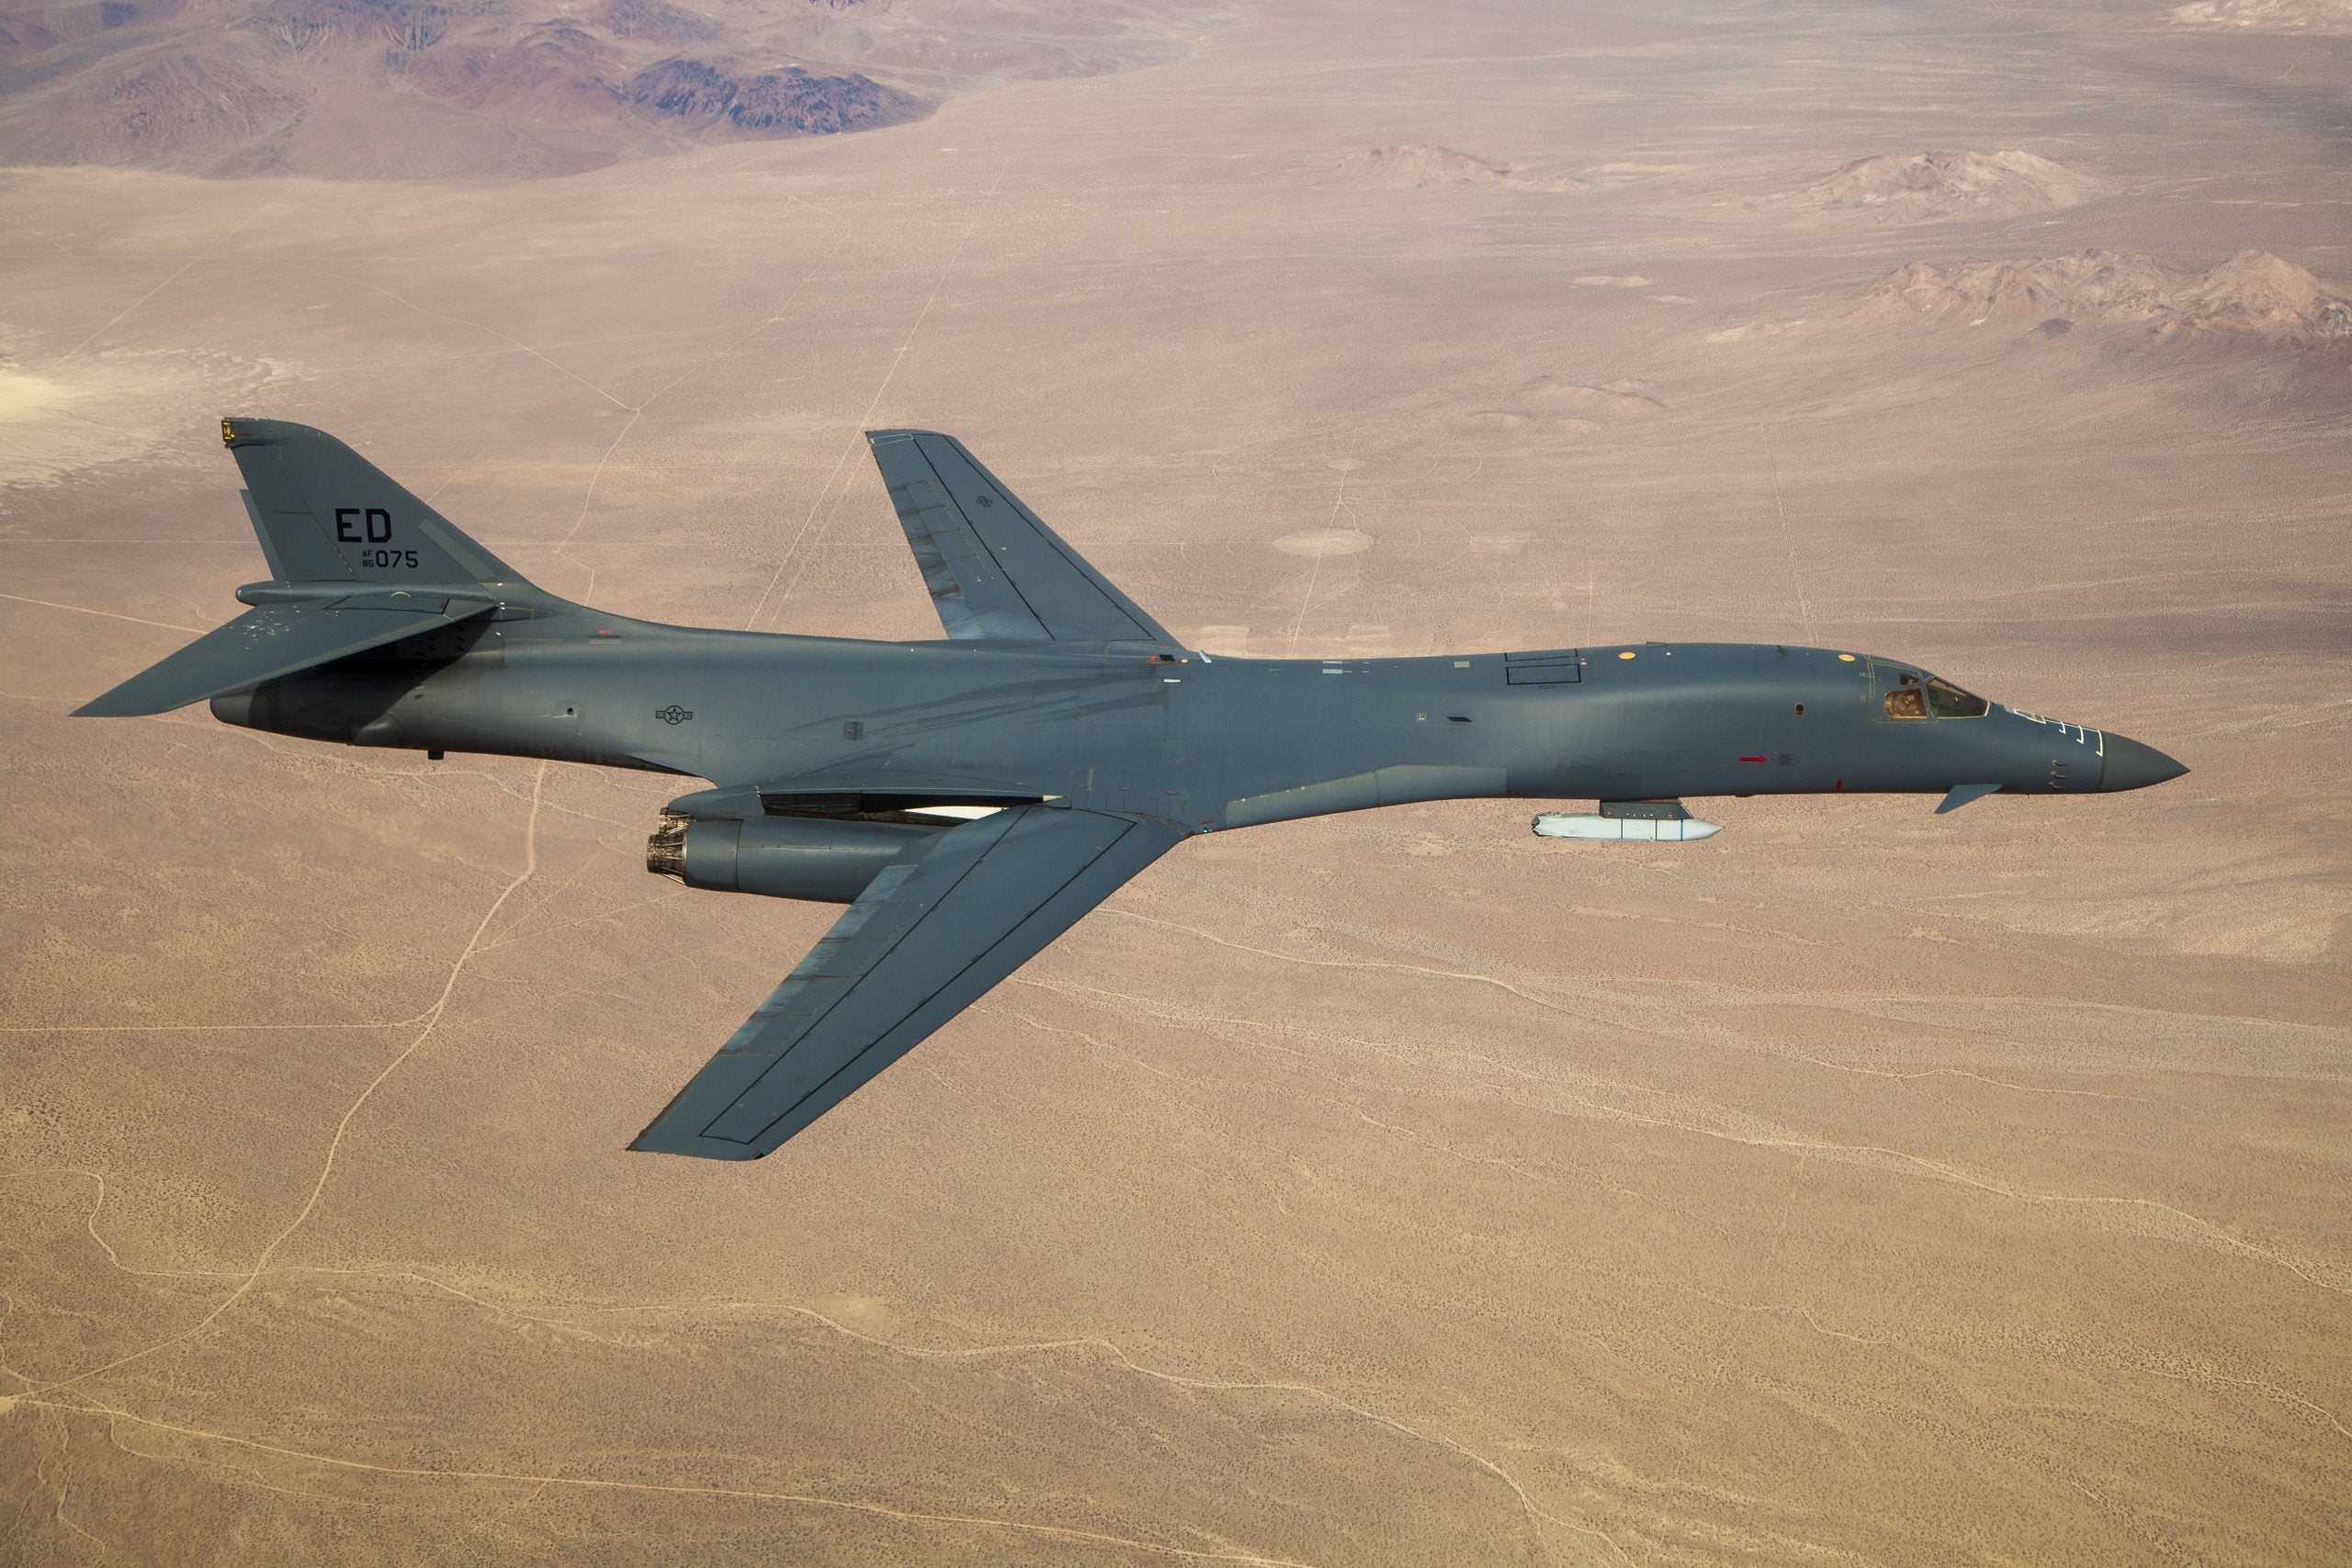 High Finances: Wait, The B-1 is Like Investing?